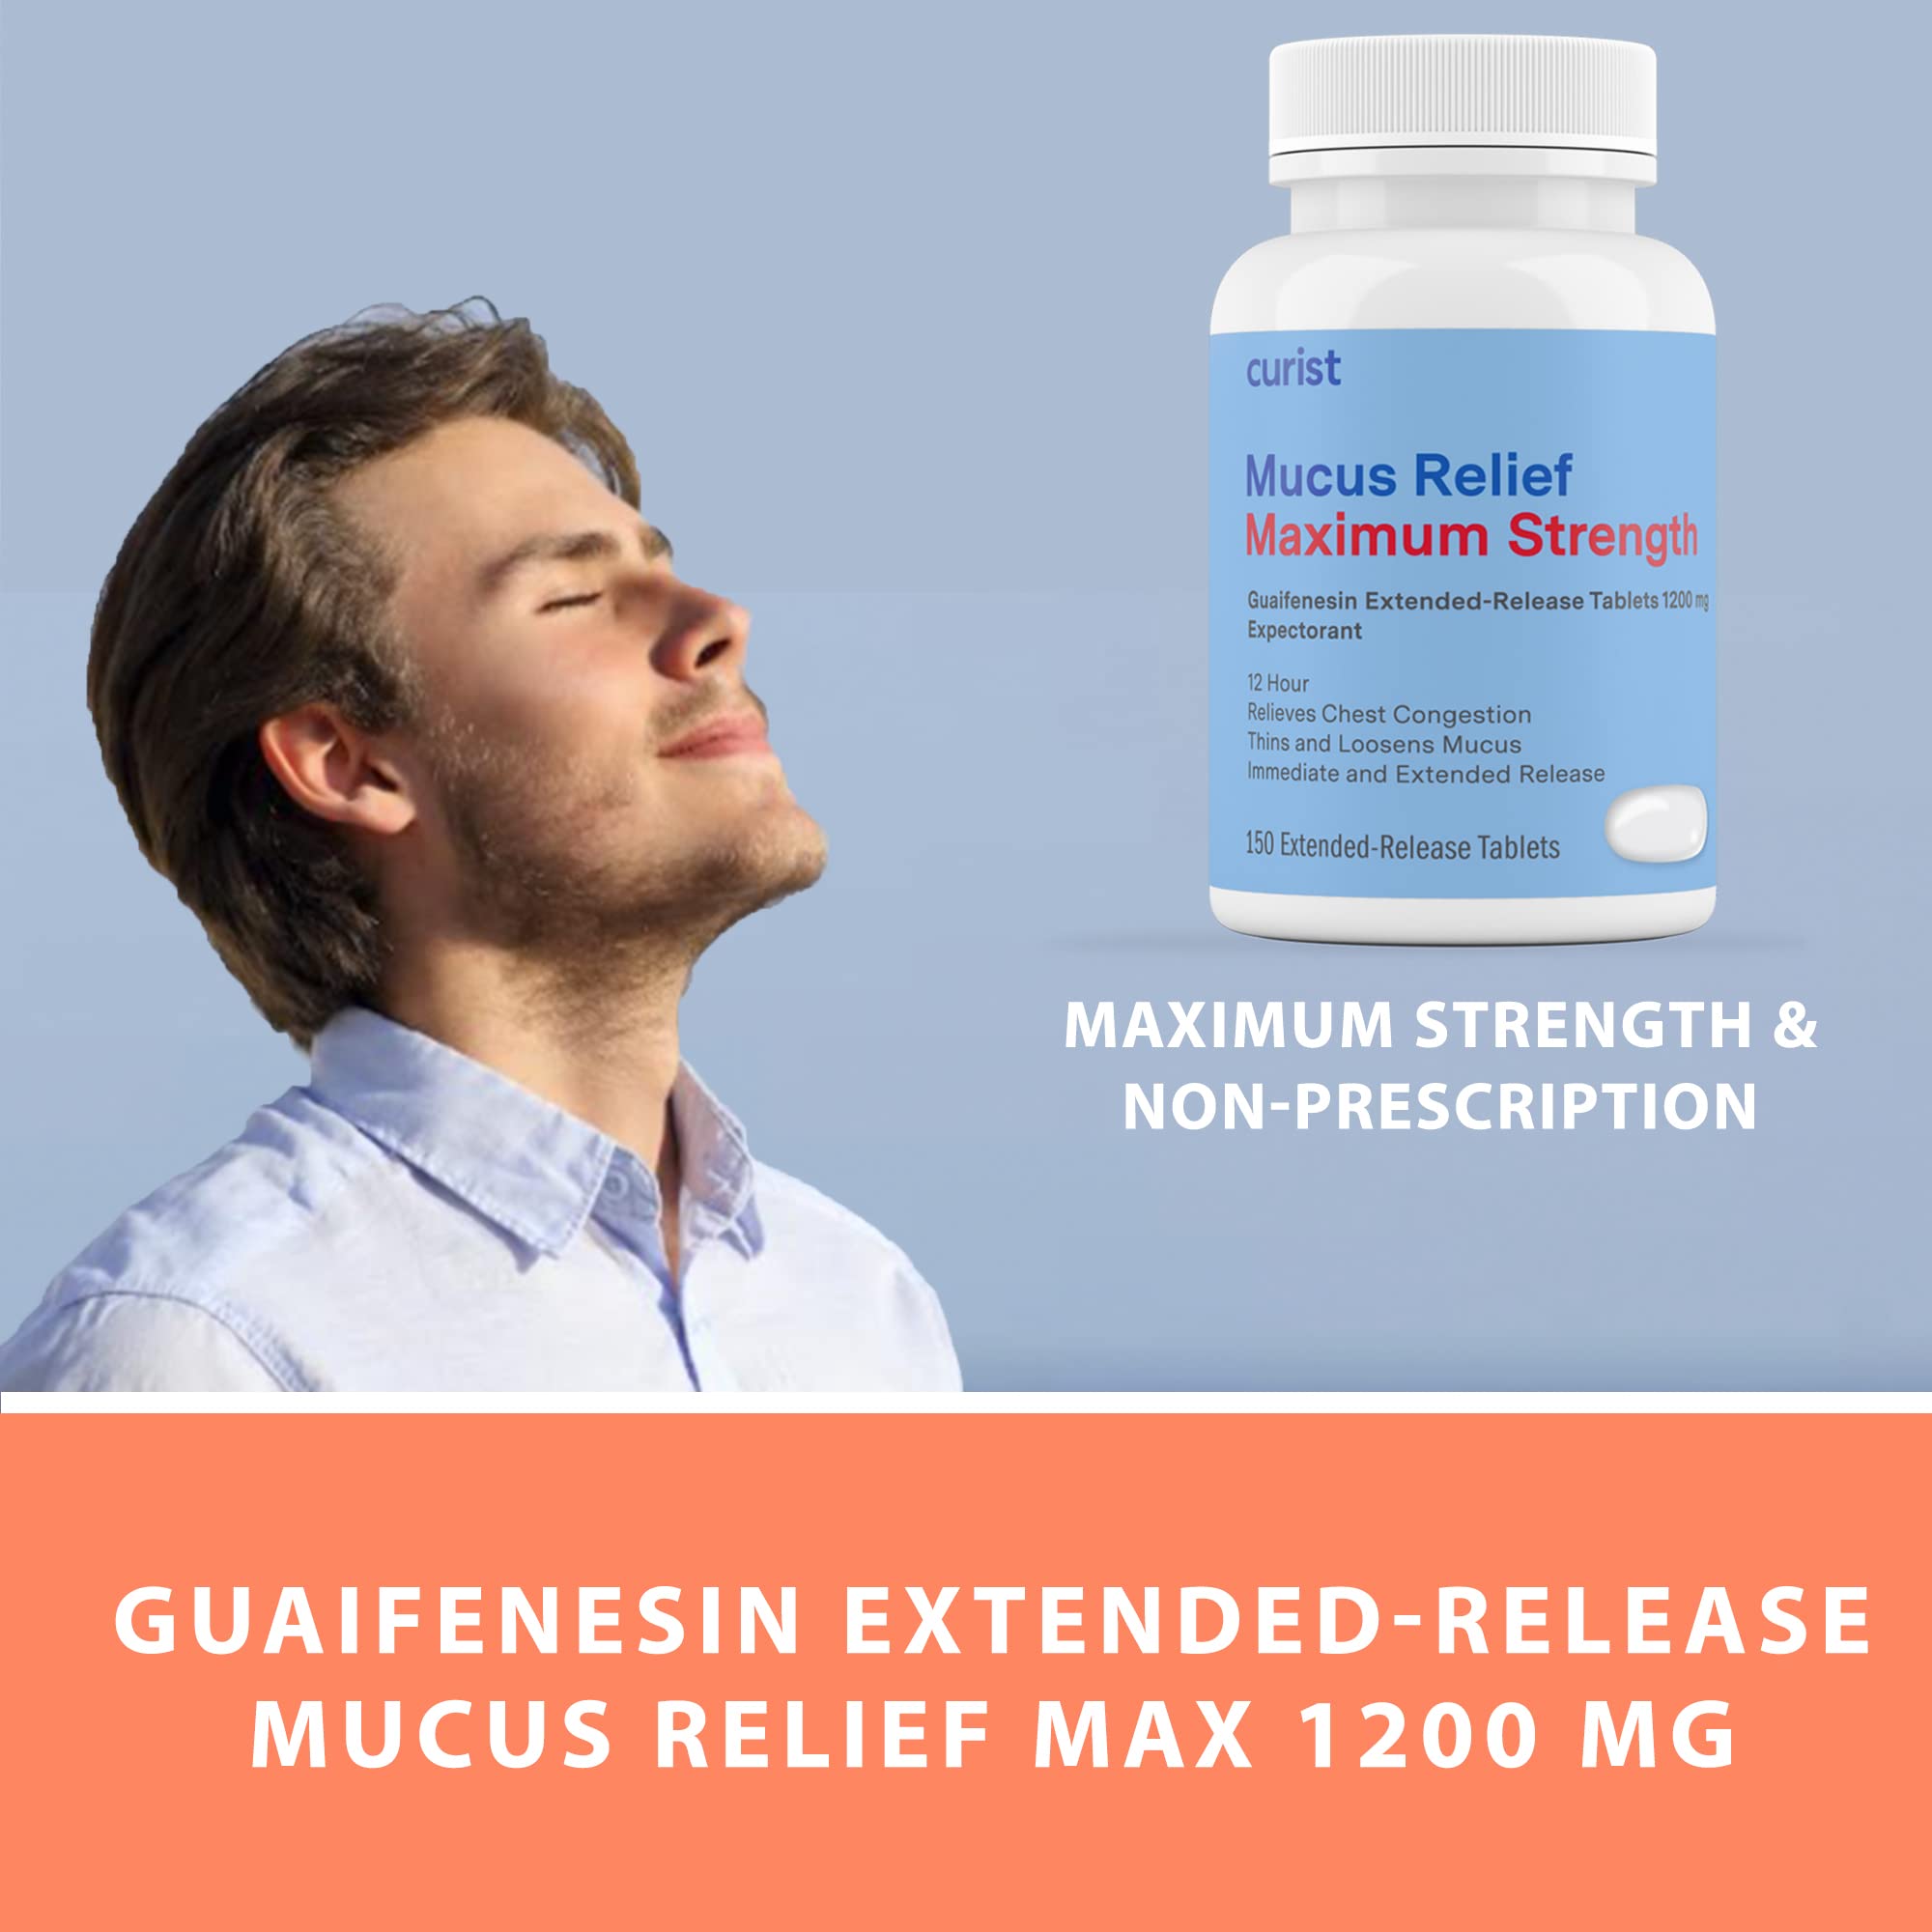 Curist Guaifenesin 1200 Mg Extended Release Tablets - 150 Count Maximum Strength Mucus Relief Tablets OTC - Reduce Mucus, Clear Congestion (1200mg Bulk Pack - 150 Tablets)